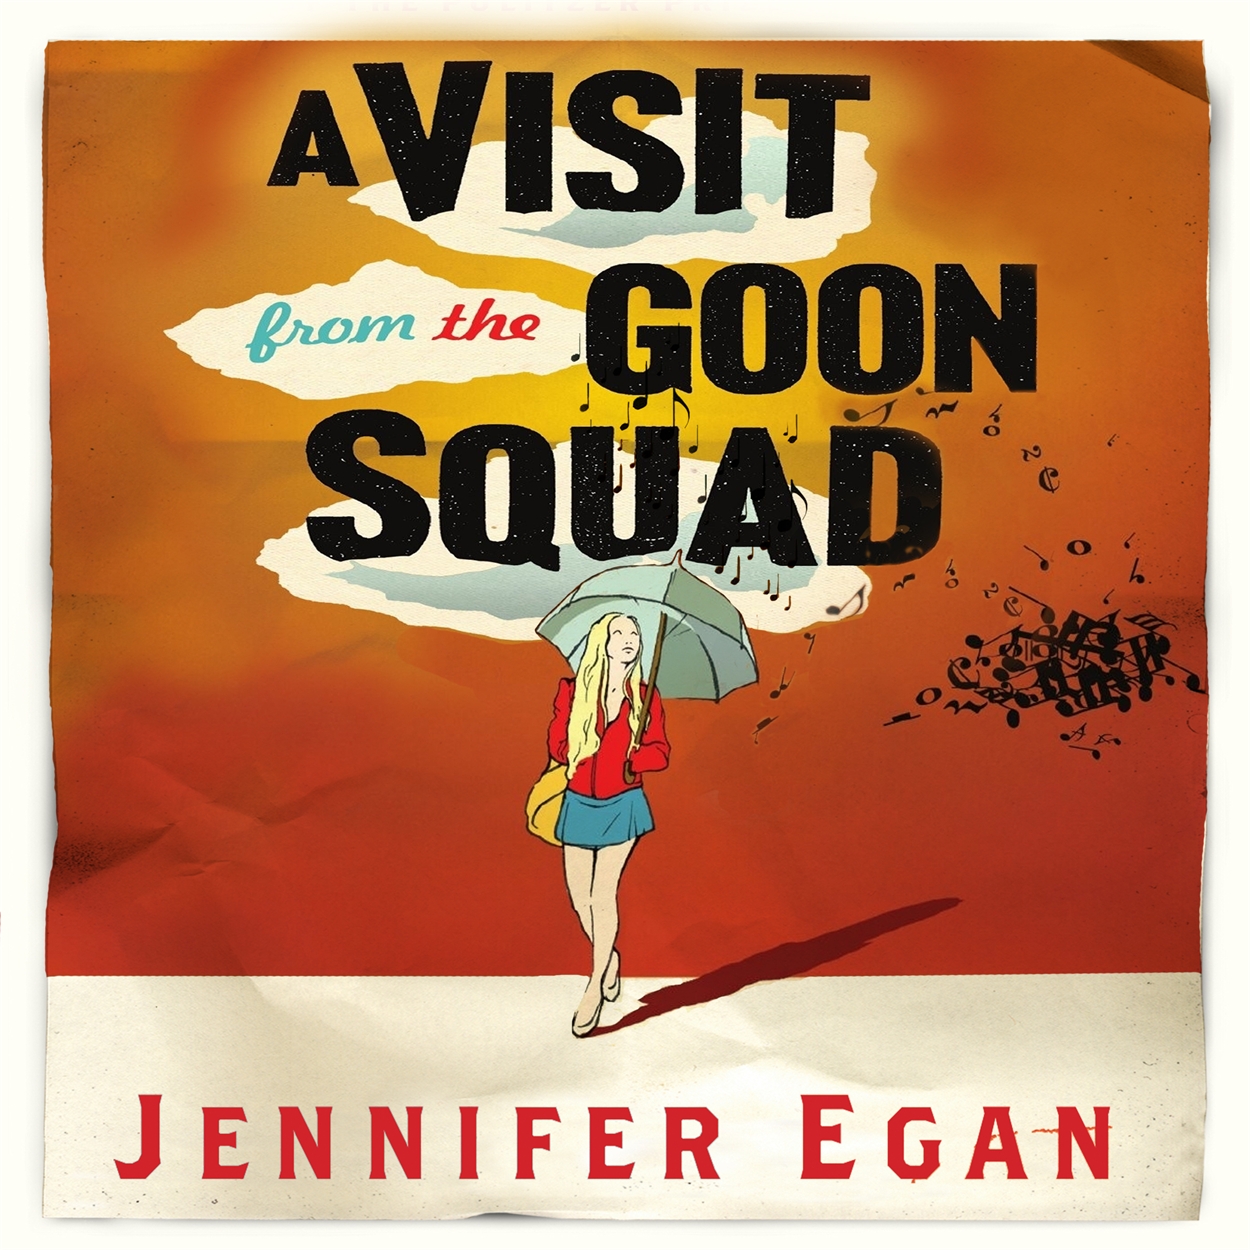 A Visit From the Goon Squad by Jennifer Egan | Hachette UK